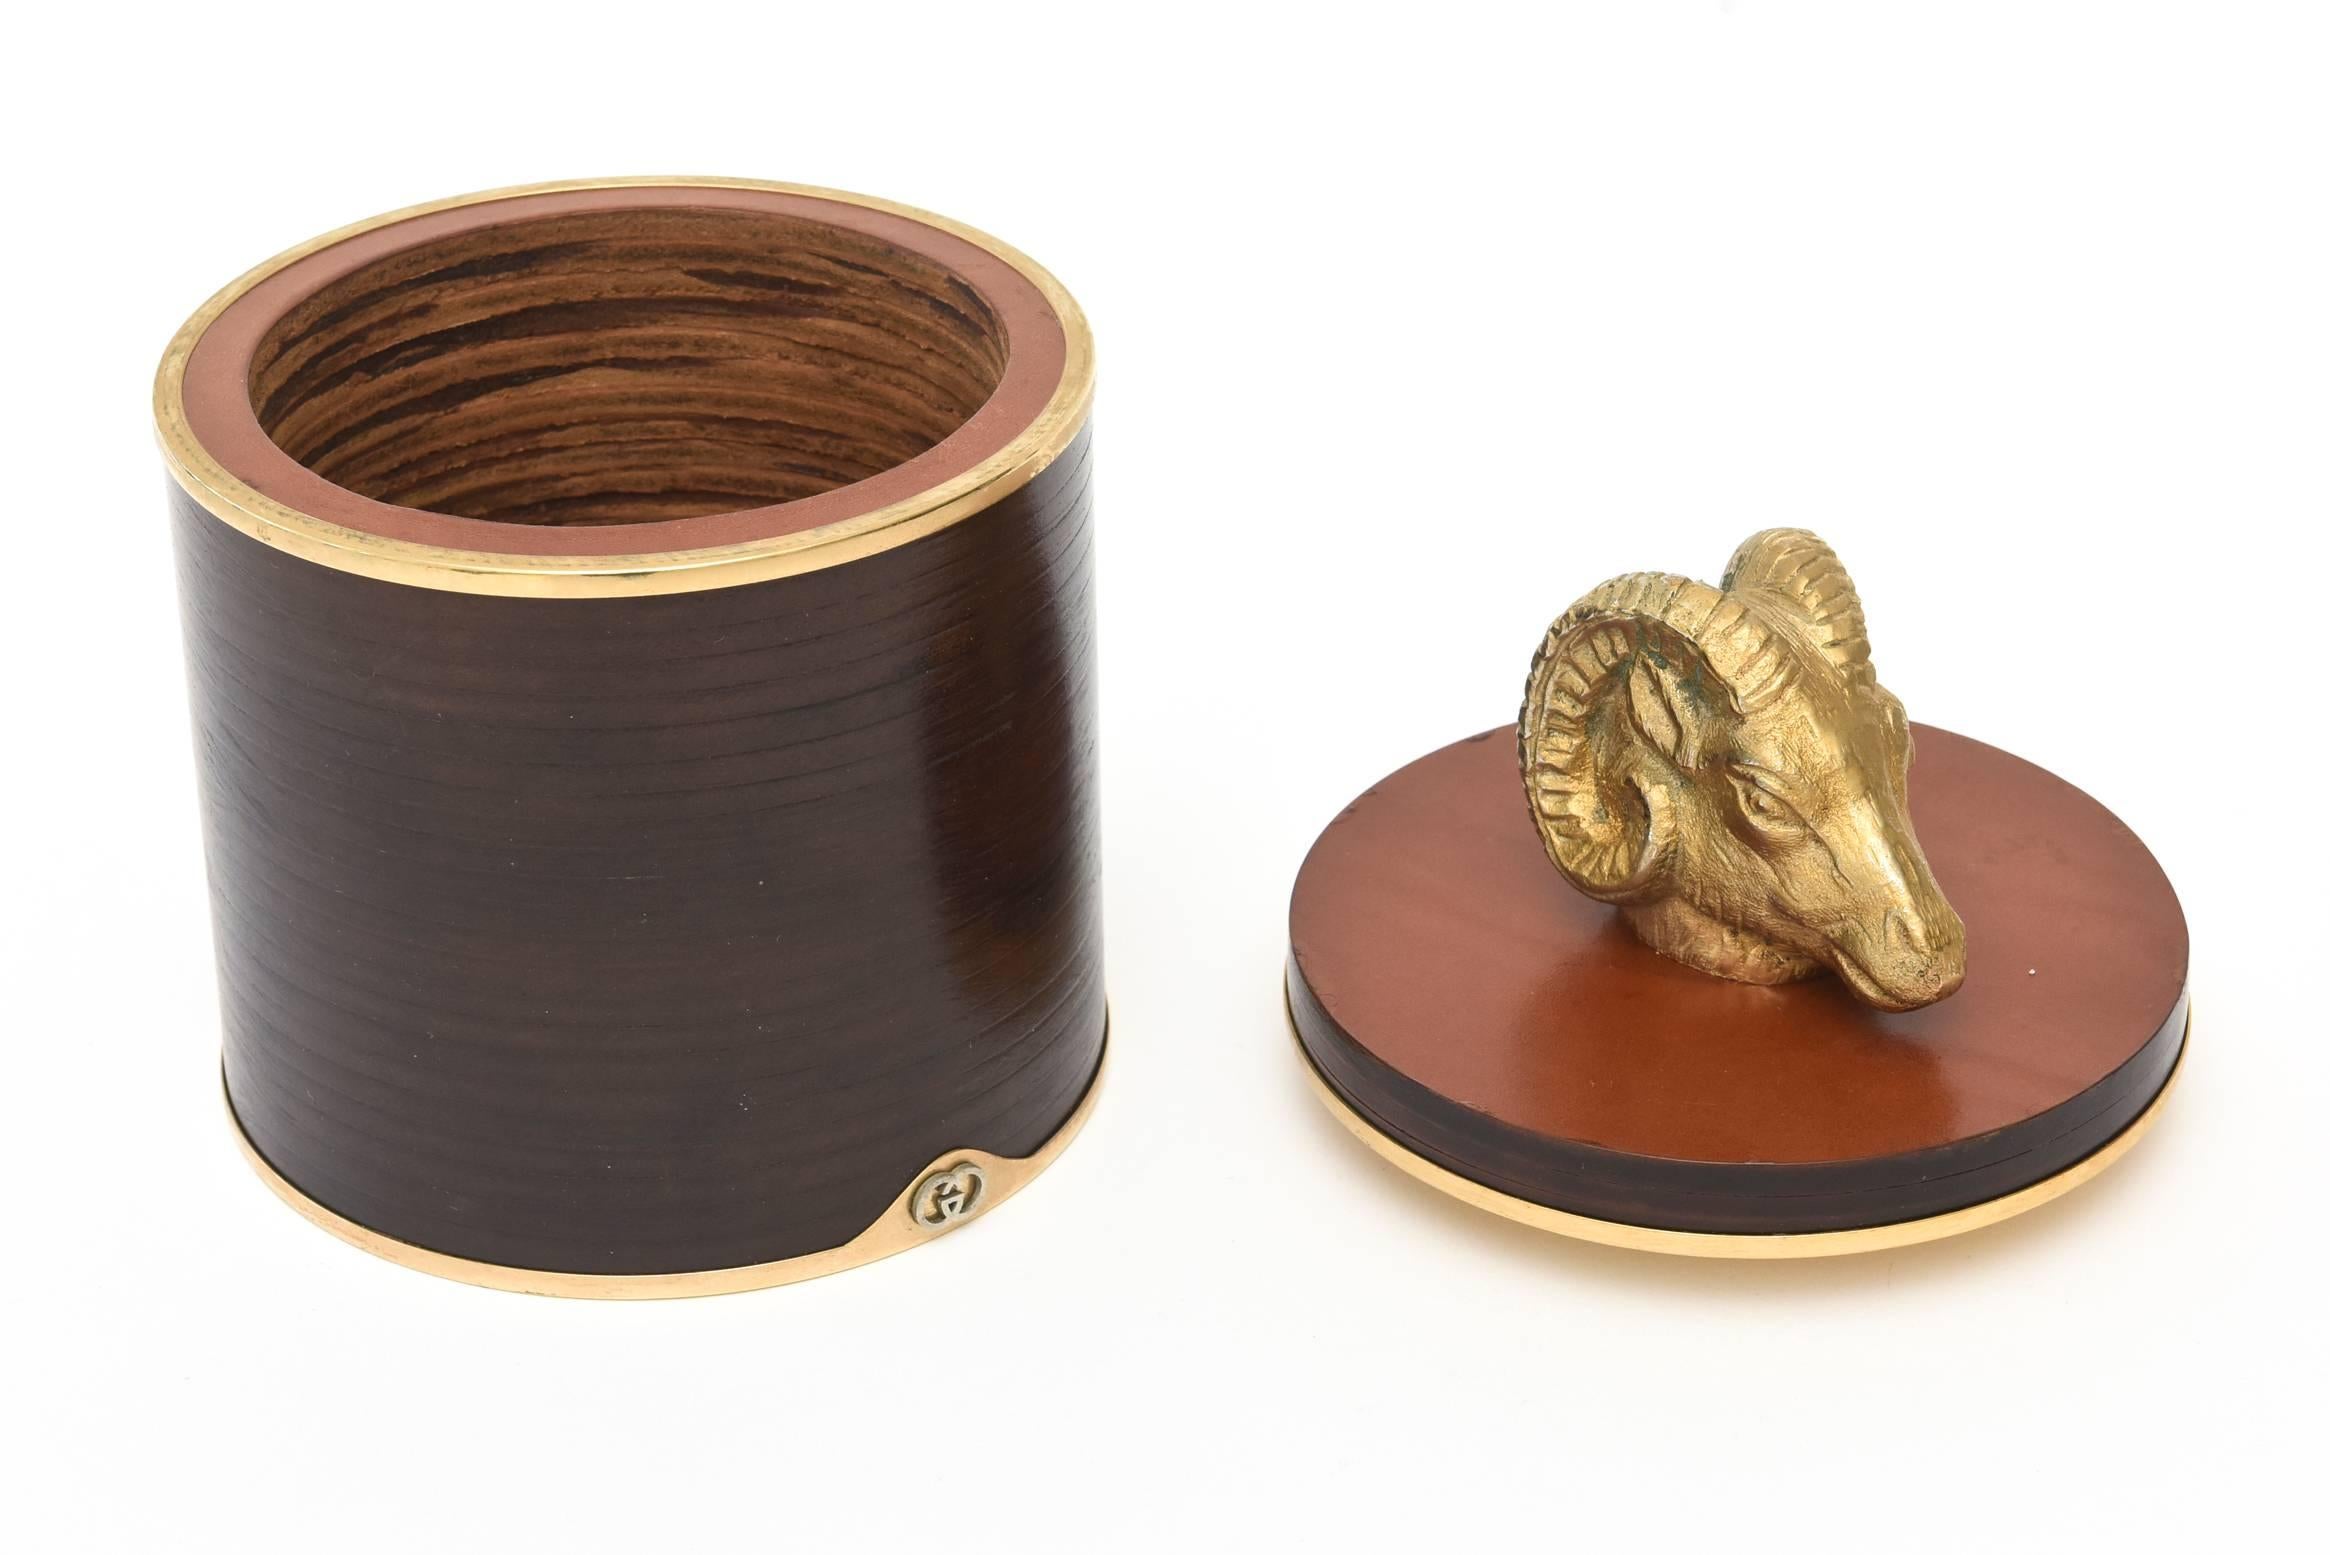 This fabulous Italian hallmarked vintage Gucci two part round ram's head box and or humidor is a great combination of leather, wood, cork and brass. It would be a great desk accessory, library or cocktail table box. It is in restored condition.